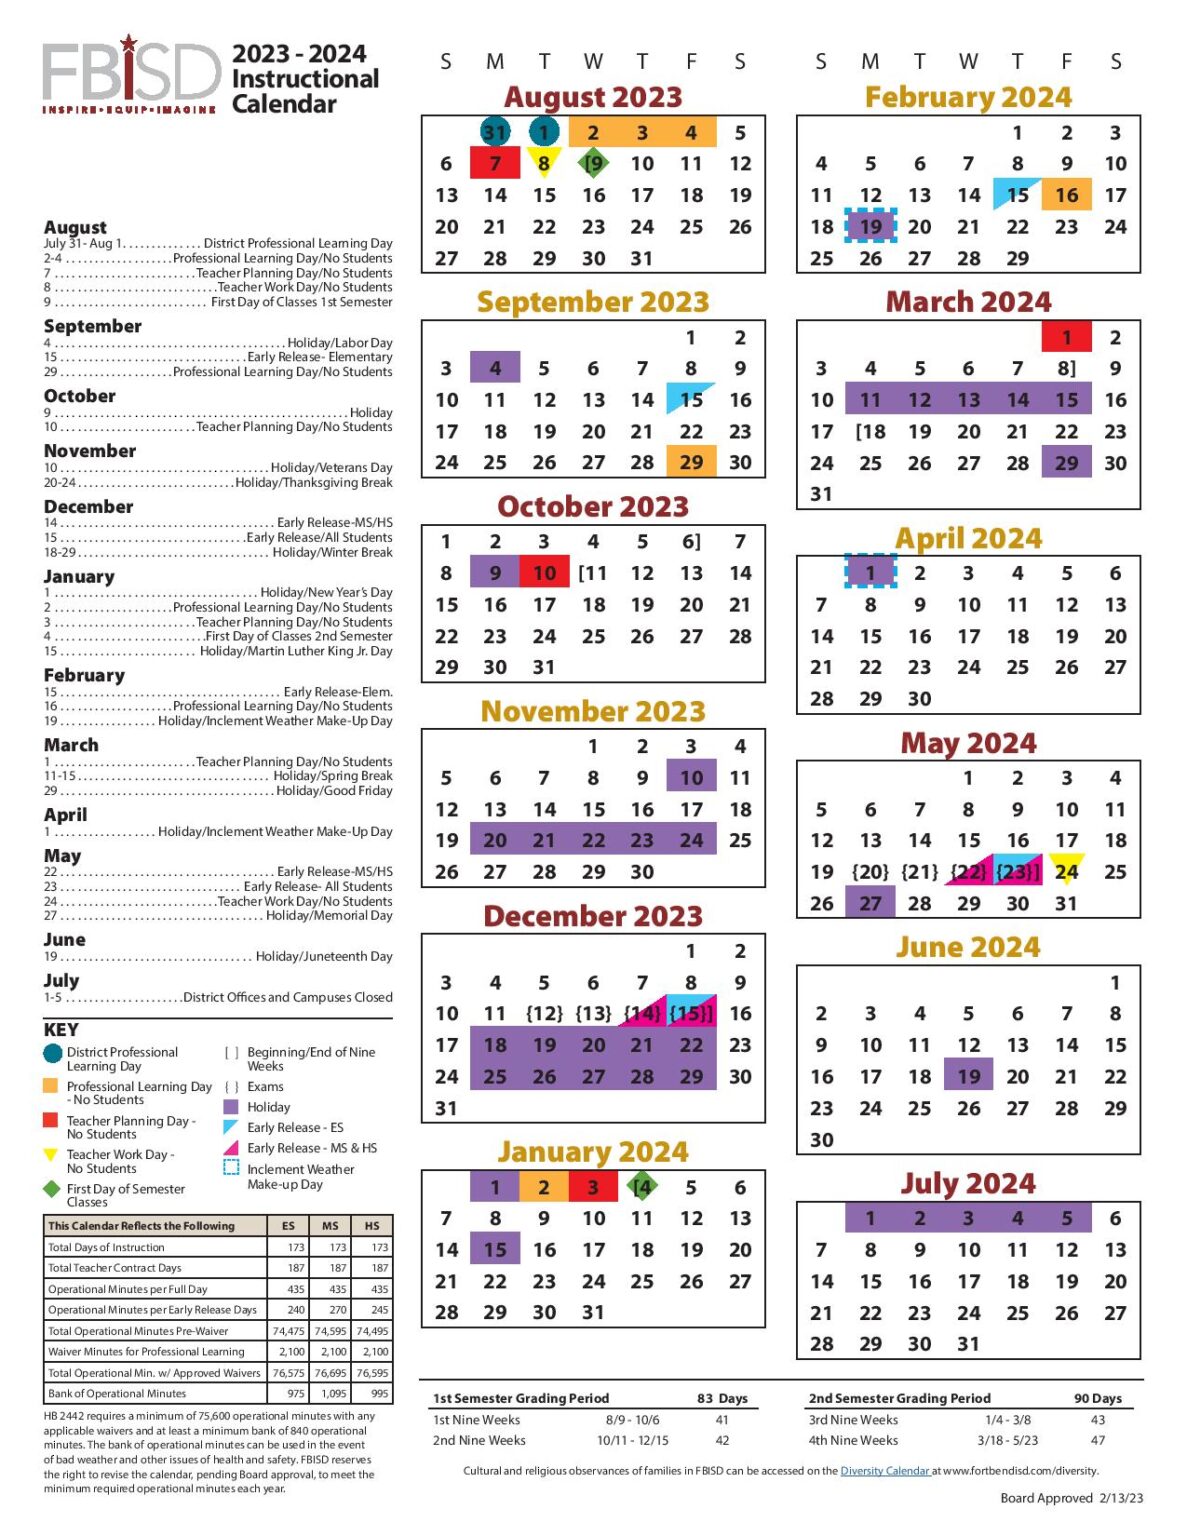 Fort Bend ISD Calendar 2024: A Comprehensive Guide for Students, Parents, and Educators - Feb 